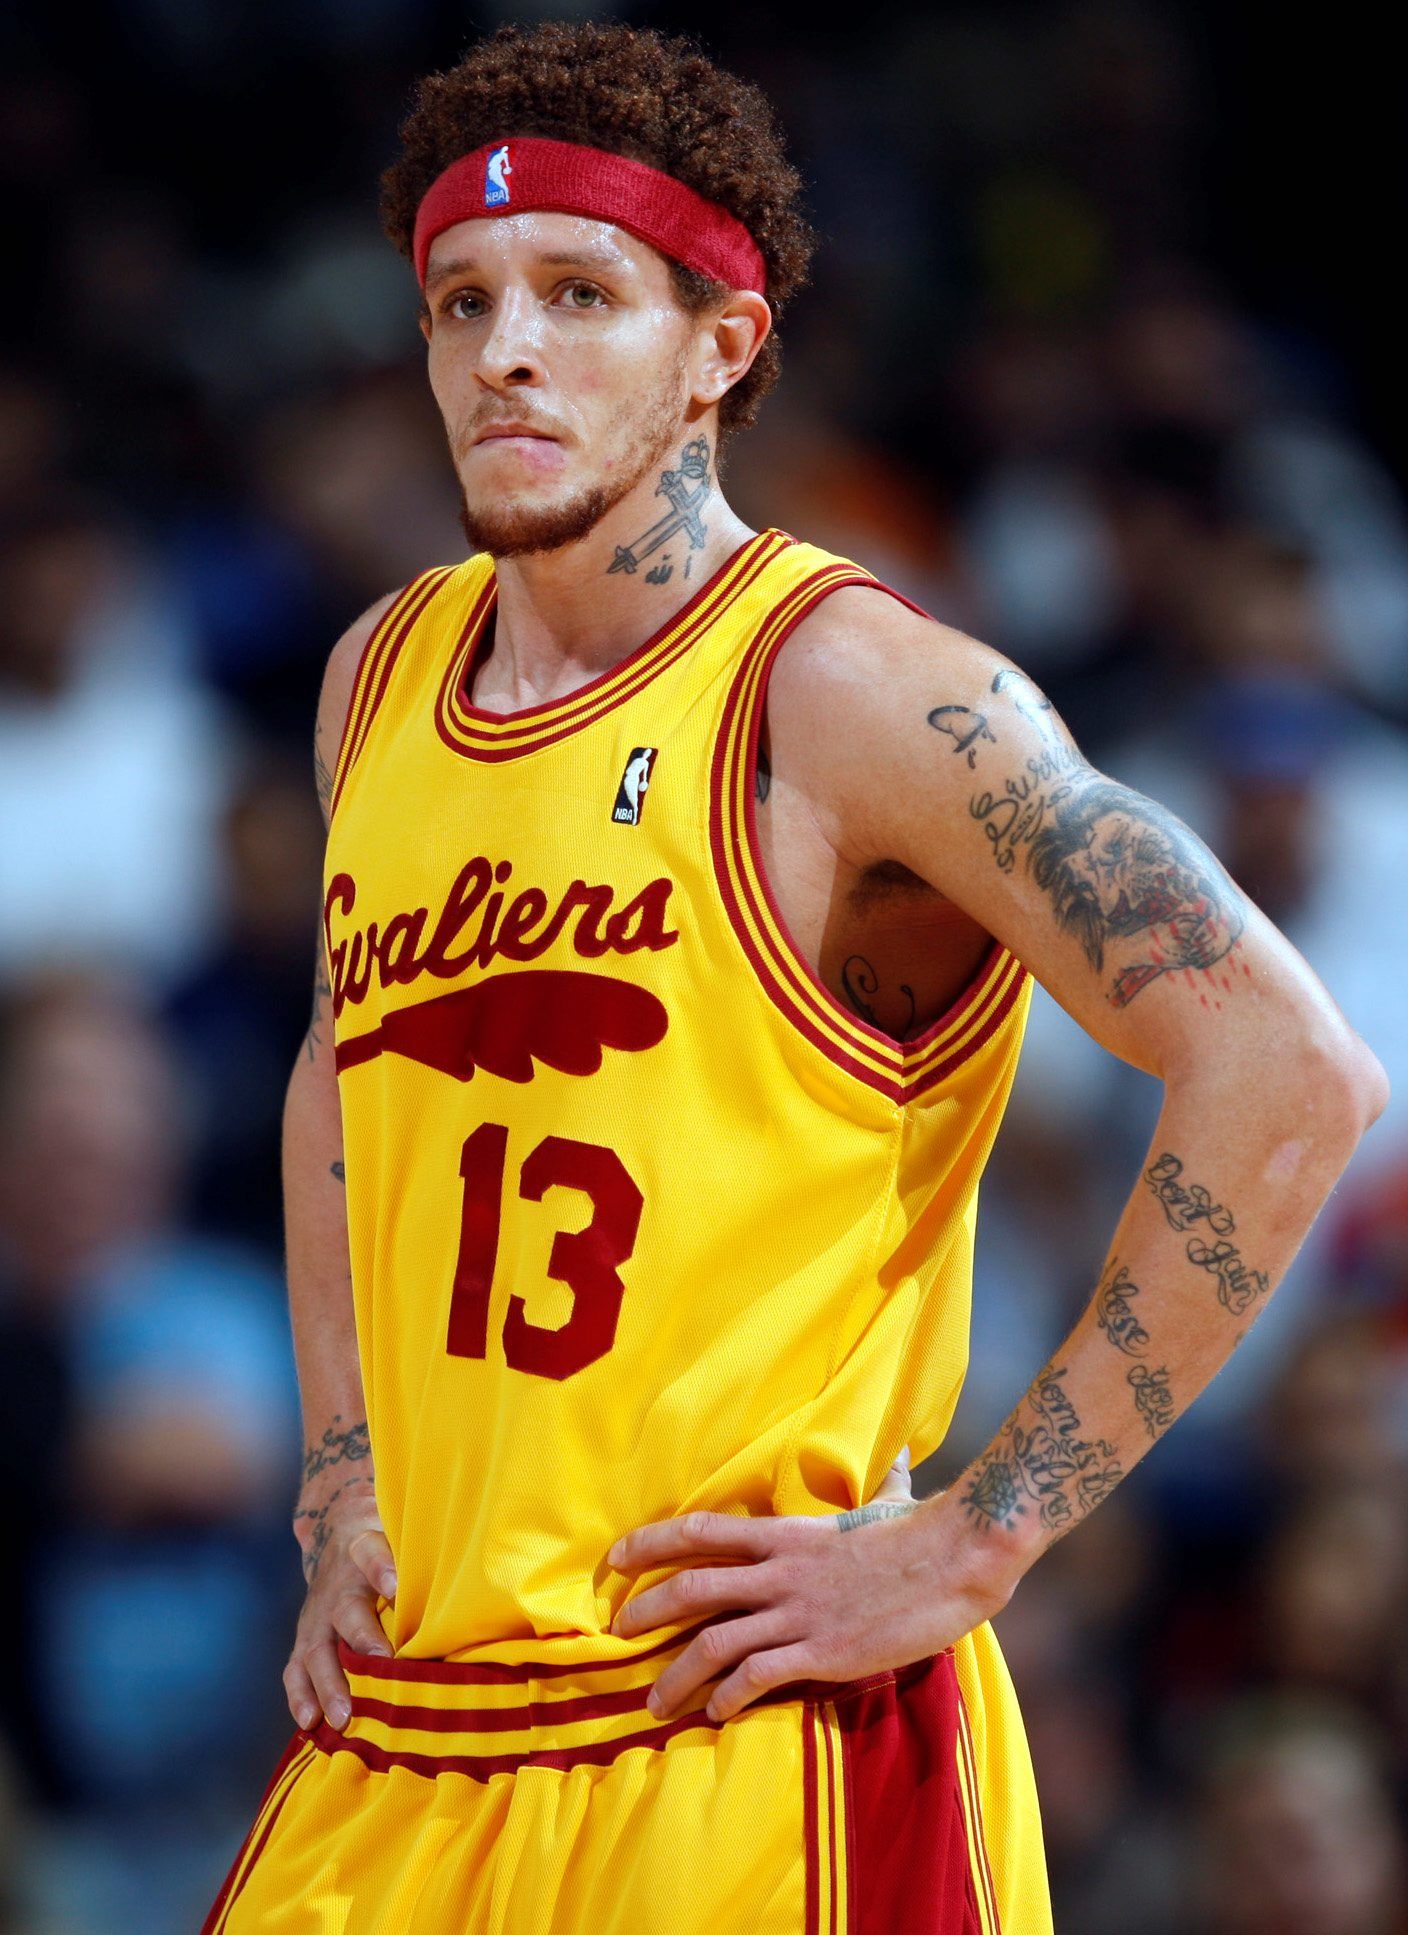 Prince George's Officer Shot Video of Ex-NBA Player Delonte West